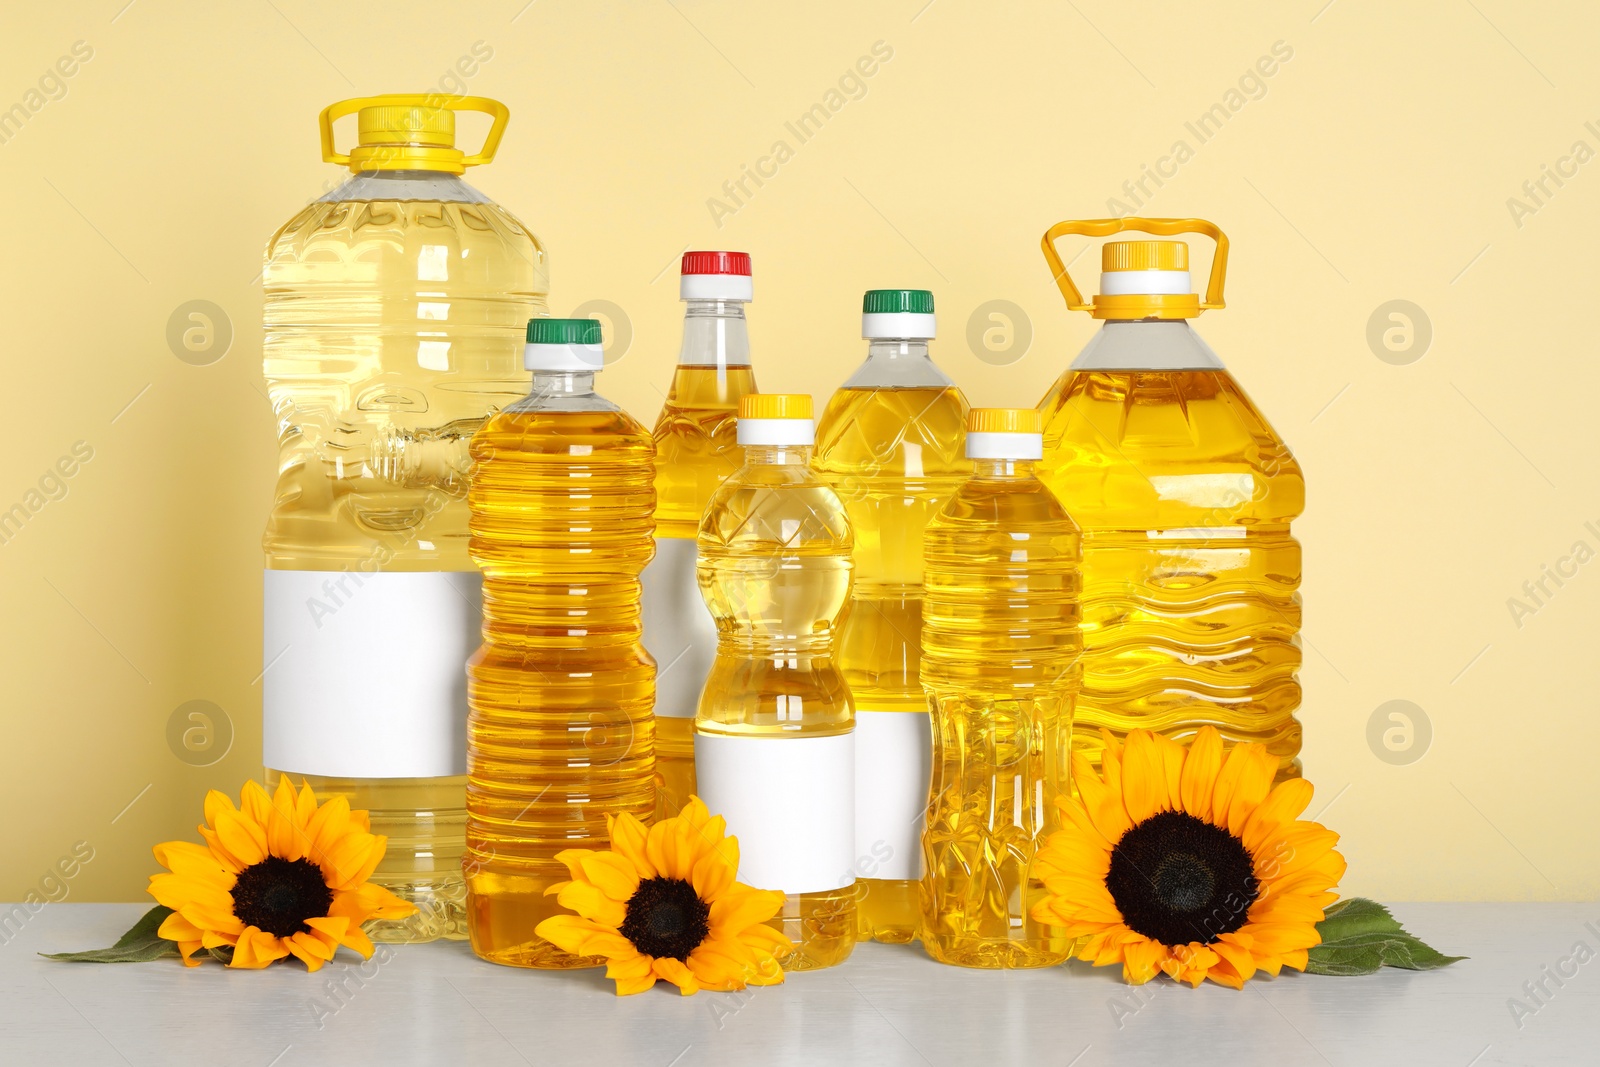 Photo of Bottles of cooking oil and sunflowers on white table